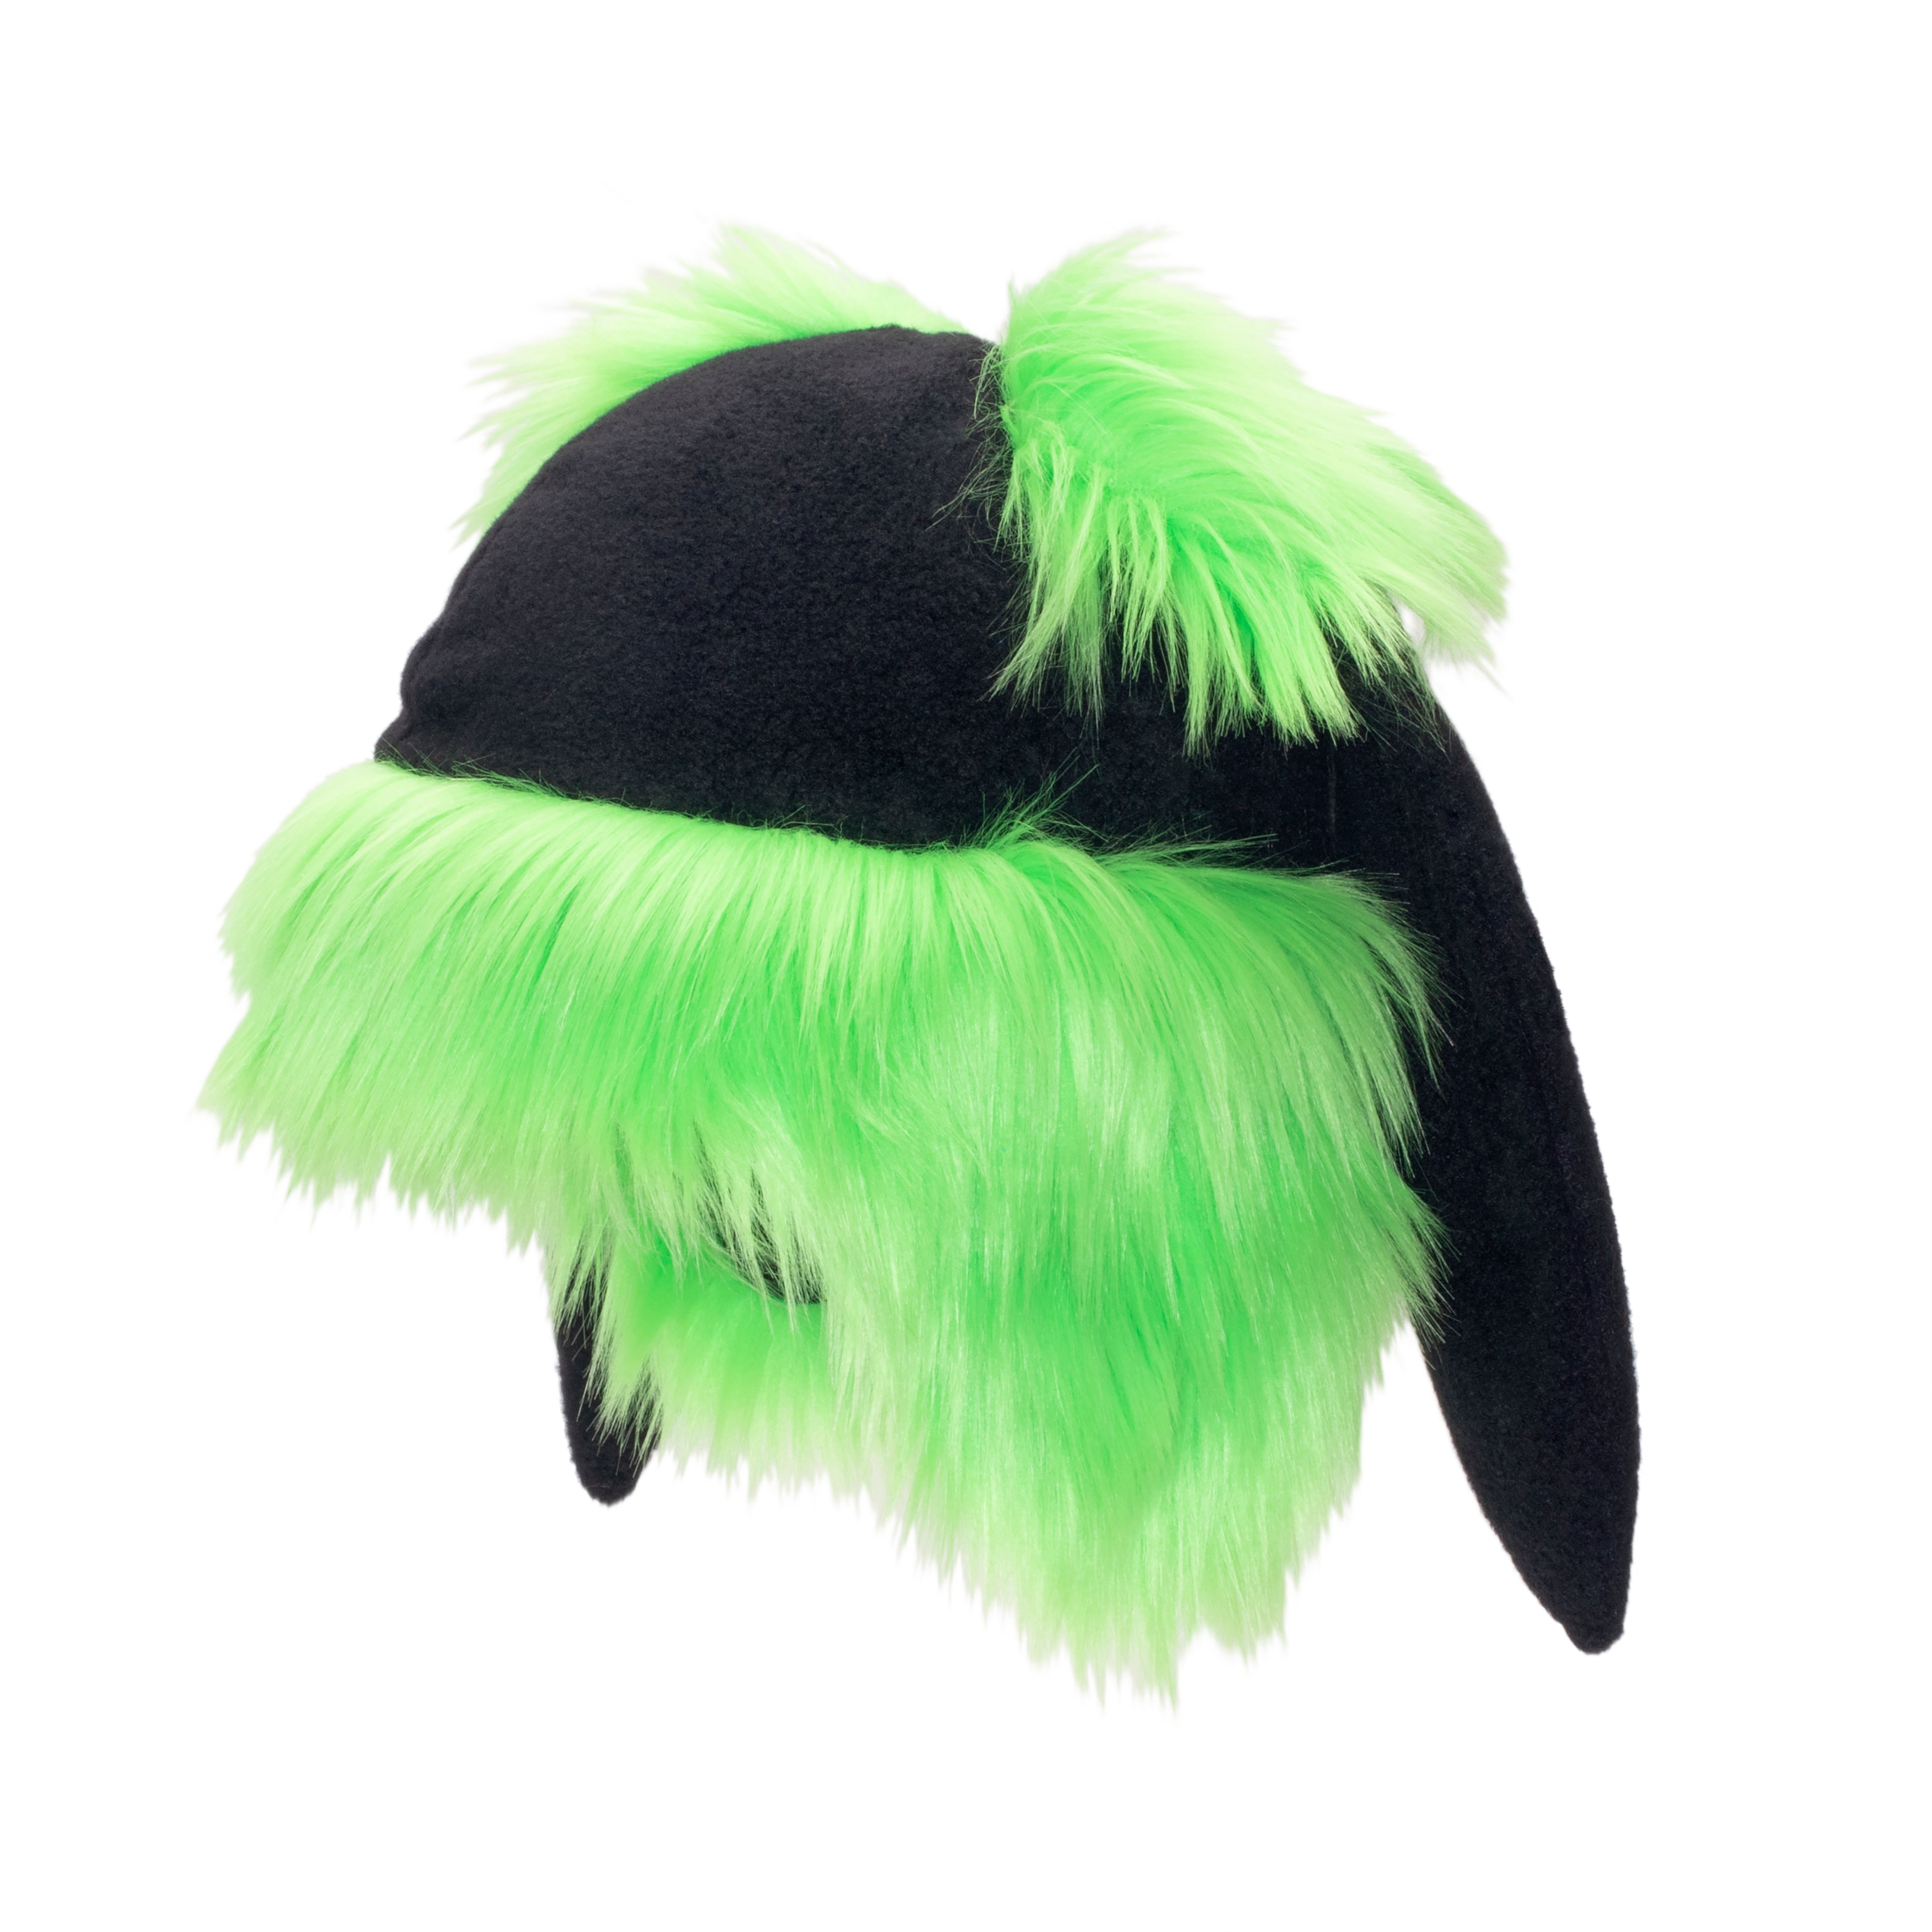 lime Pawstar cute fluffy furry bunny ear har. Great for halloween costume and furry costume.